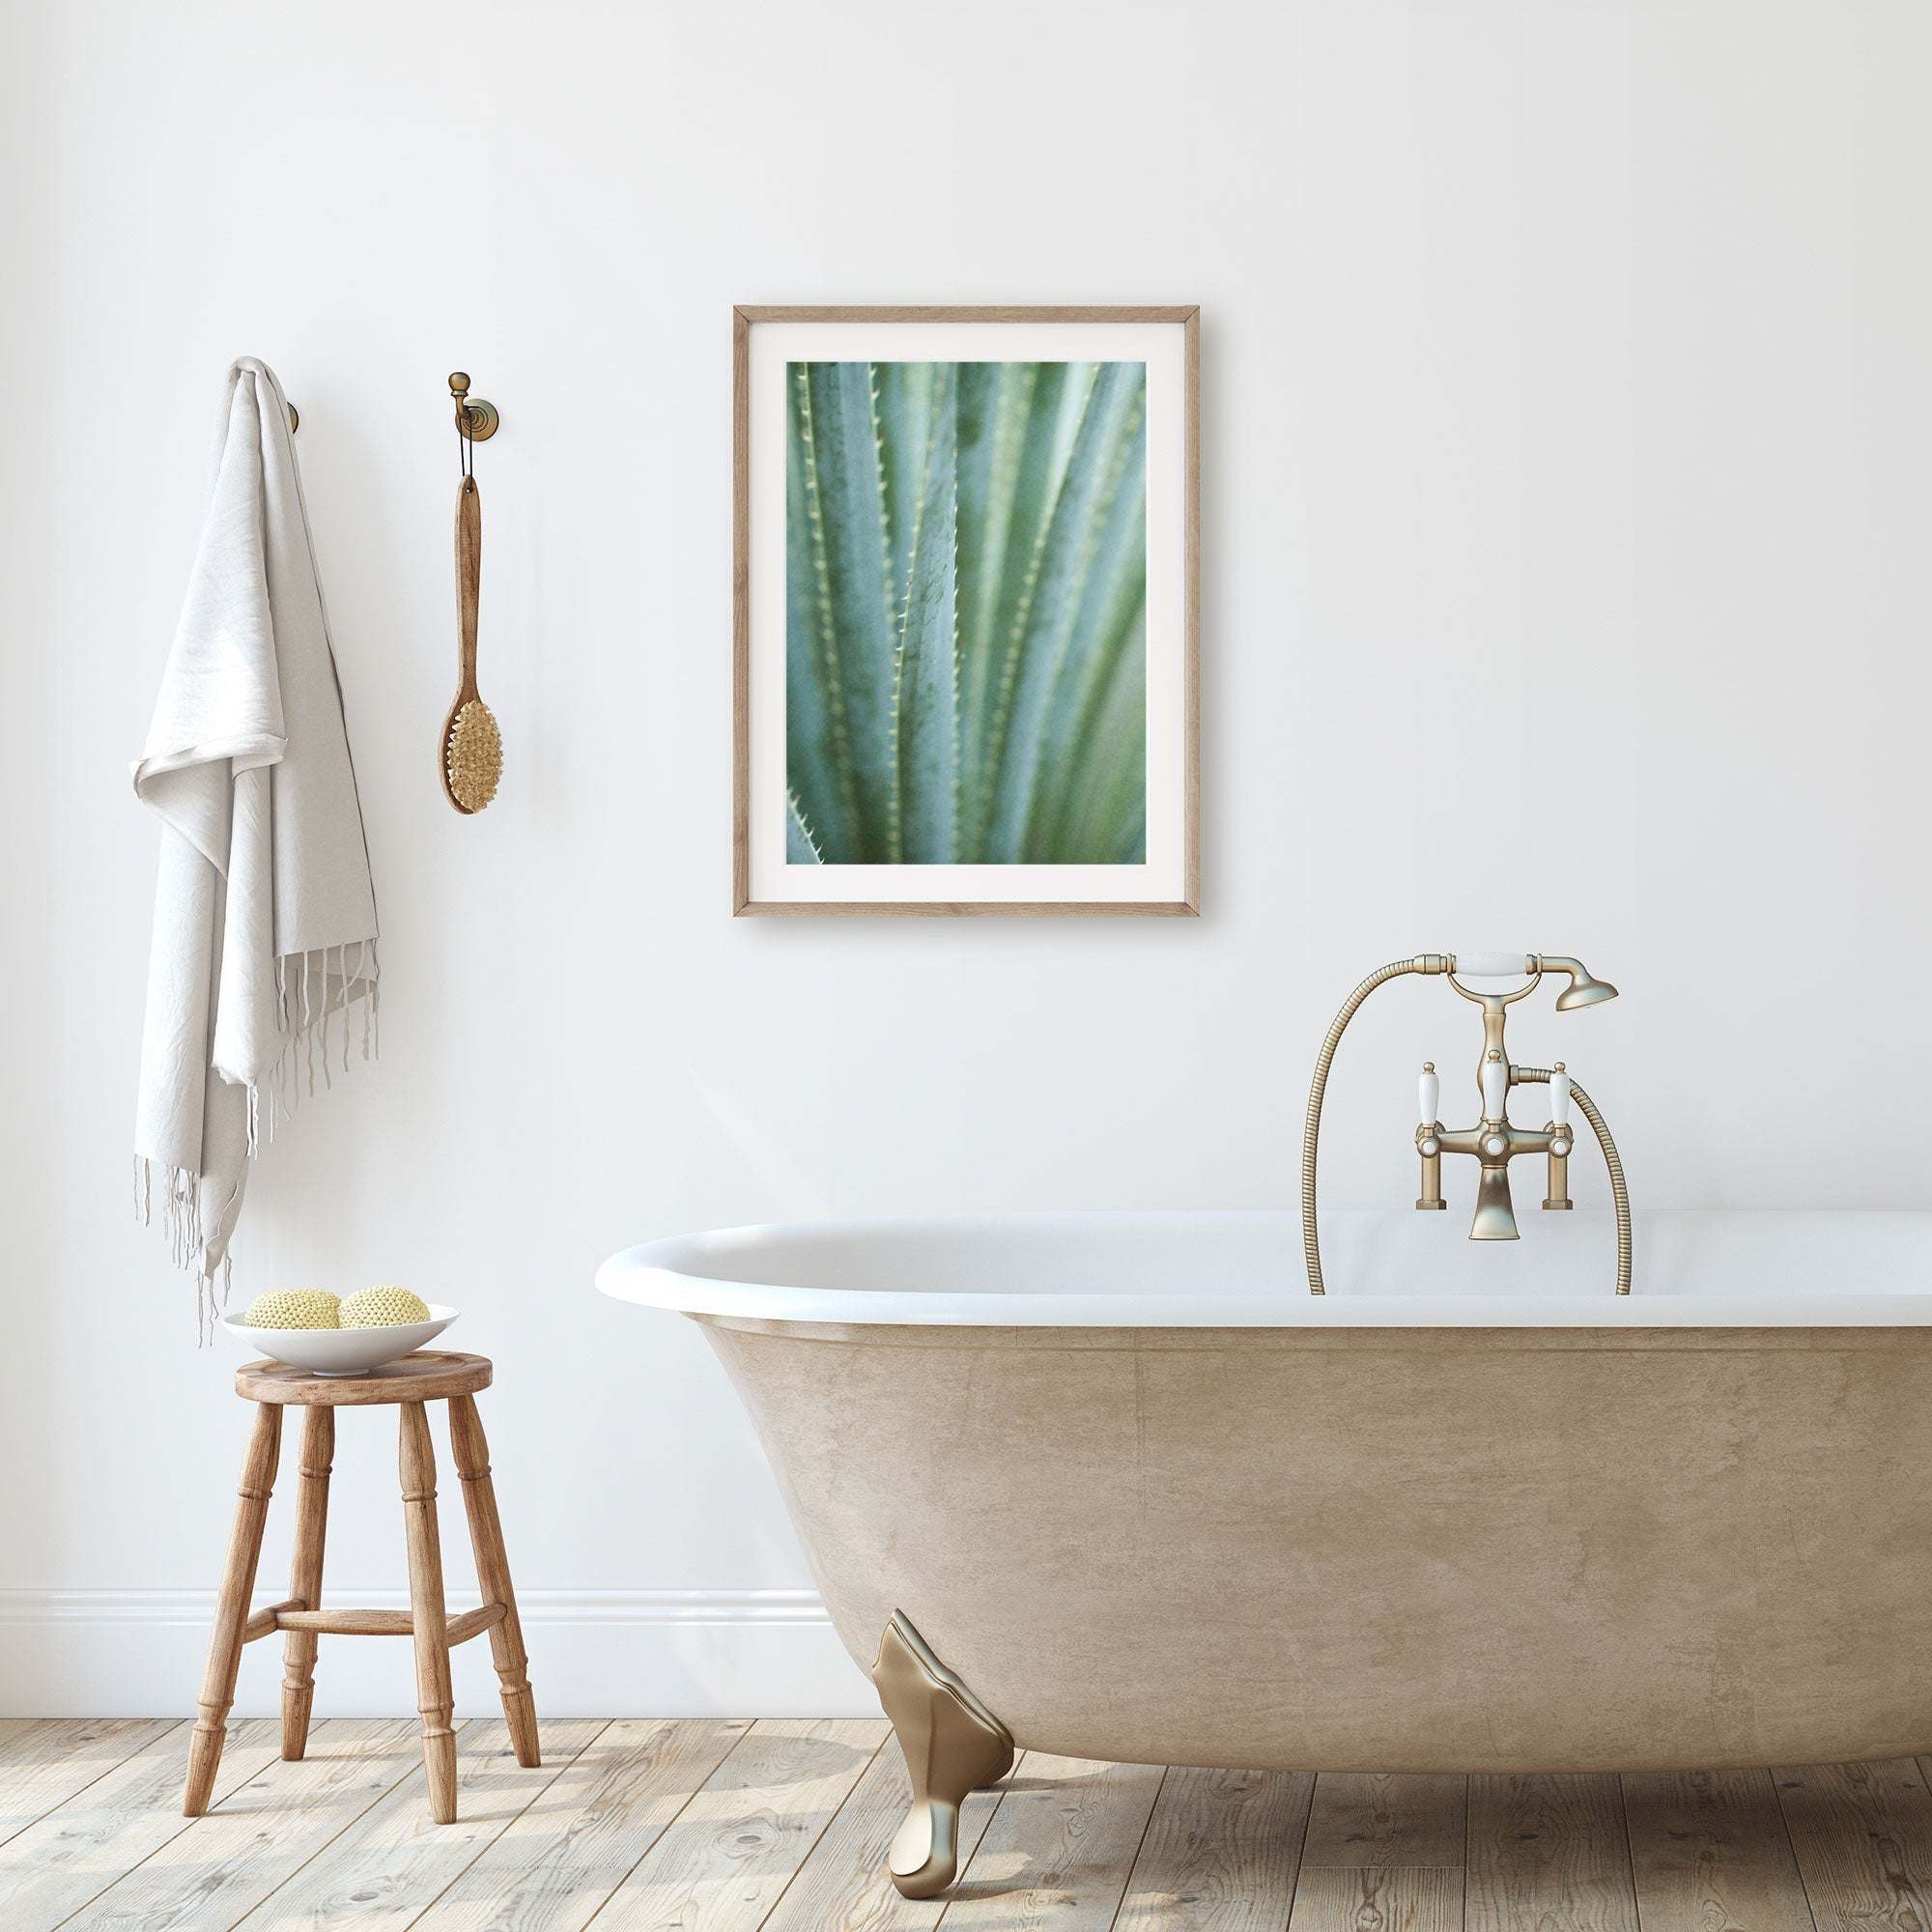 A minimalist bathroom with a freestanding bathtub, a stool holding bath accessories, and an unframed &#39;Strands and Spikes II&#39; desert plants photograph by Offley Green on the wall. A towel hangs beside a wooden brush.